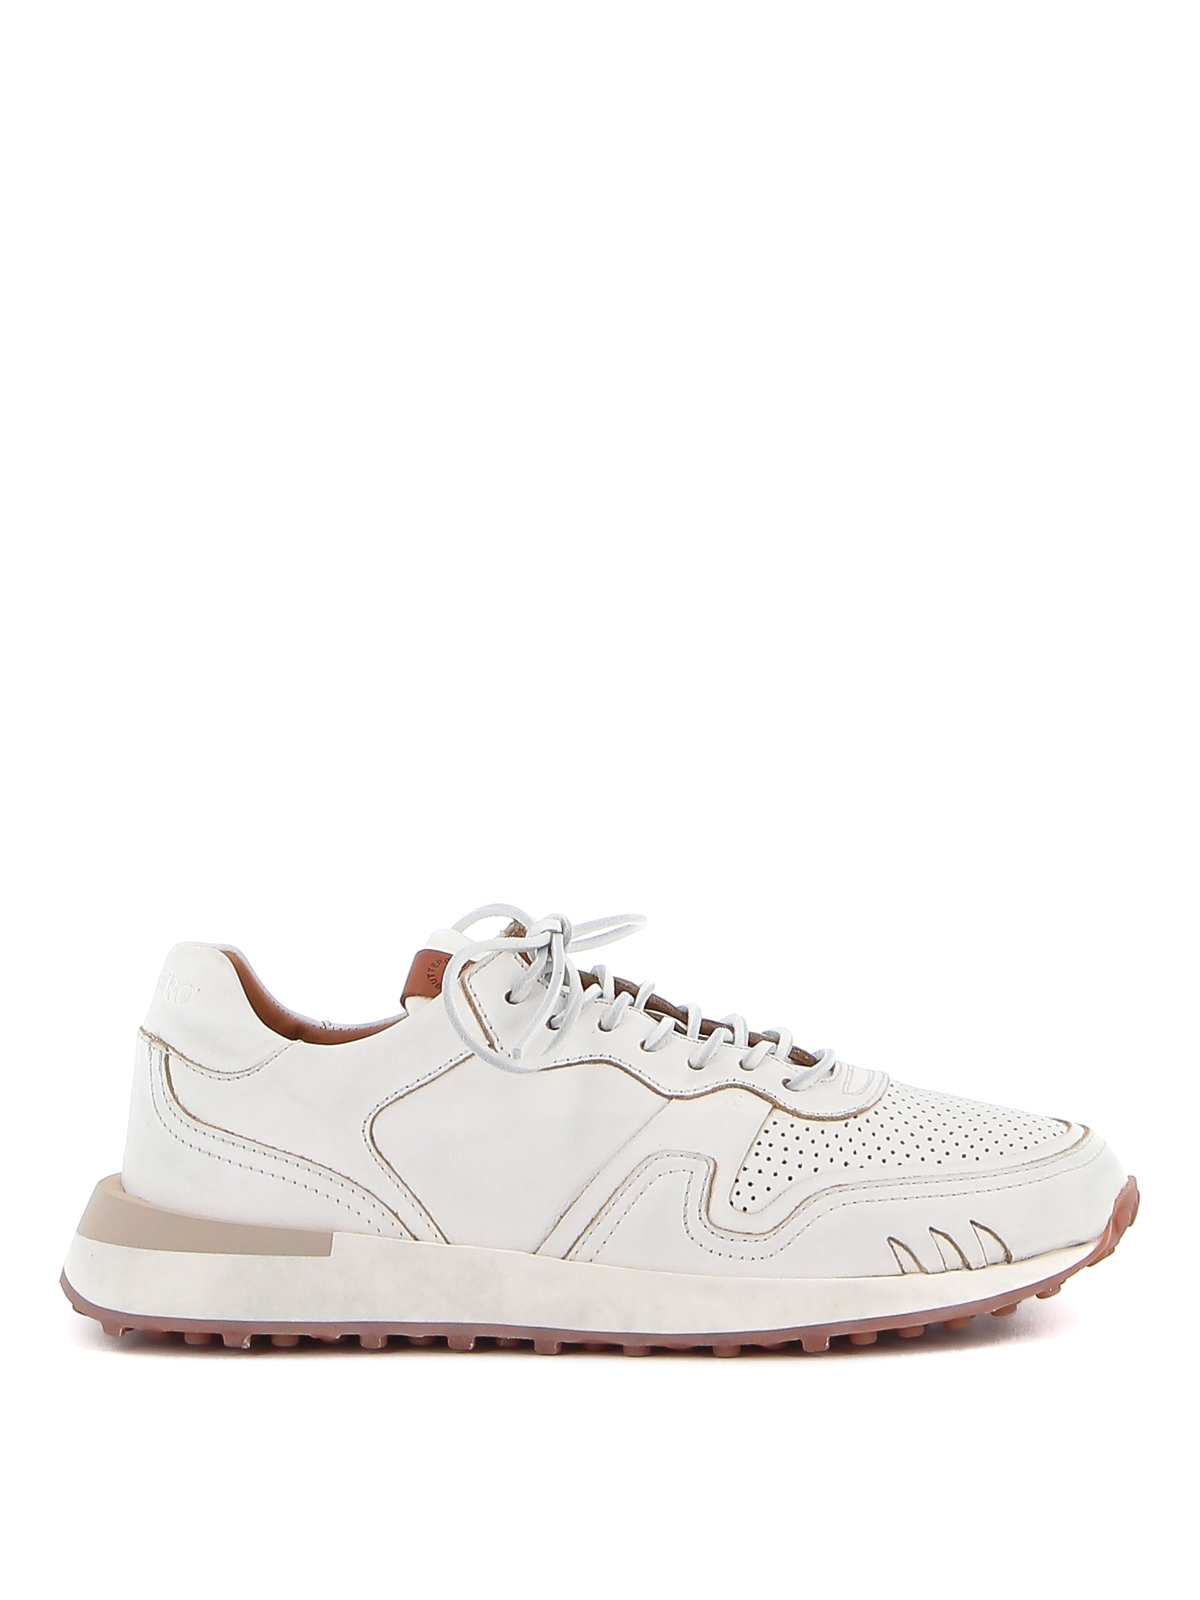 Trainers Buttero - Futura sneakers - B9351RUBEUG02 | Shop online at iKRIX